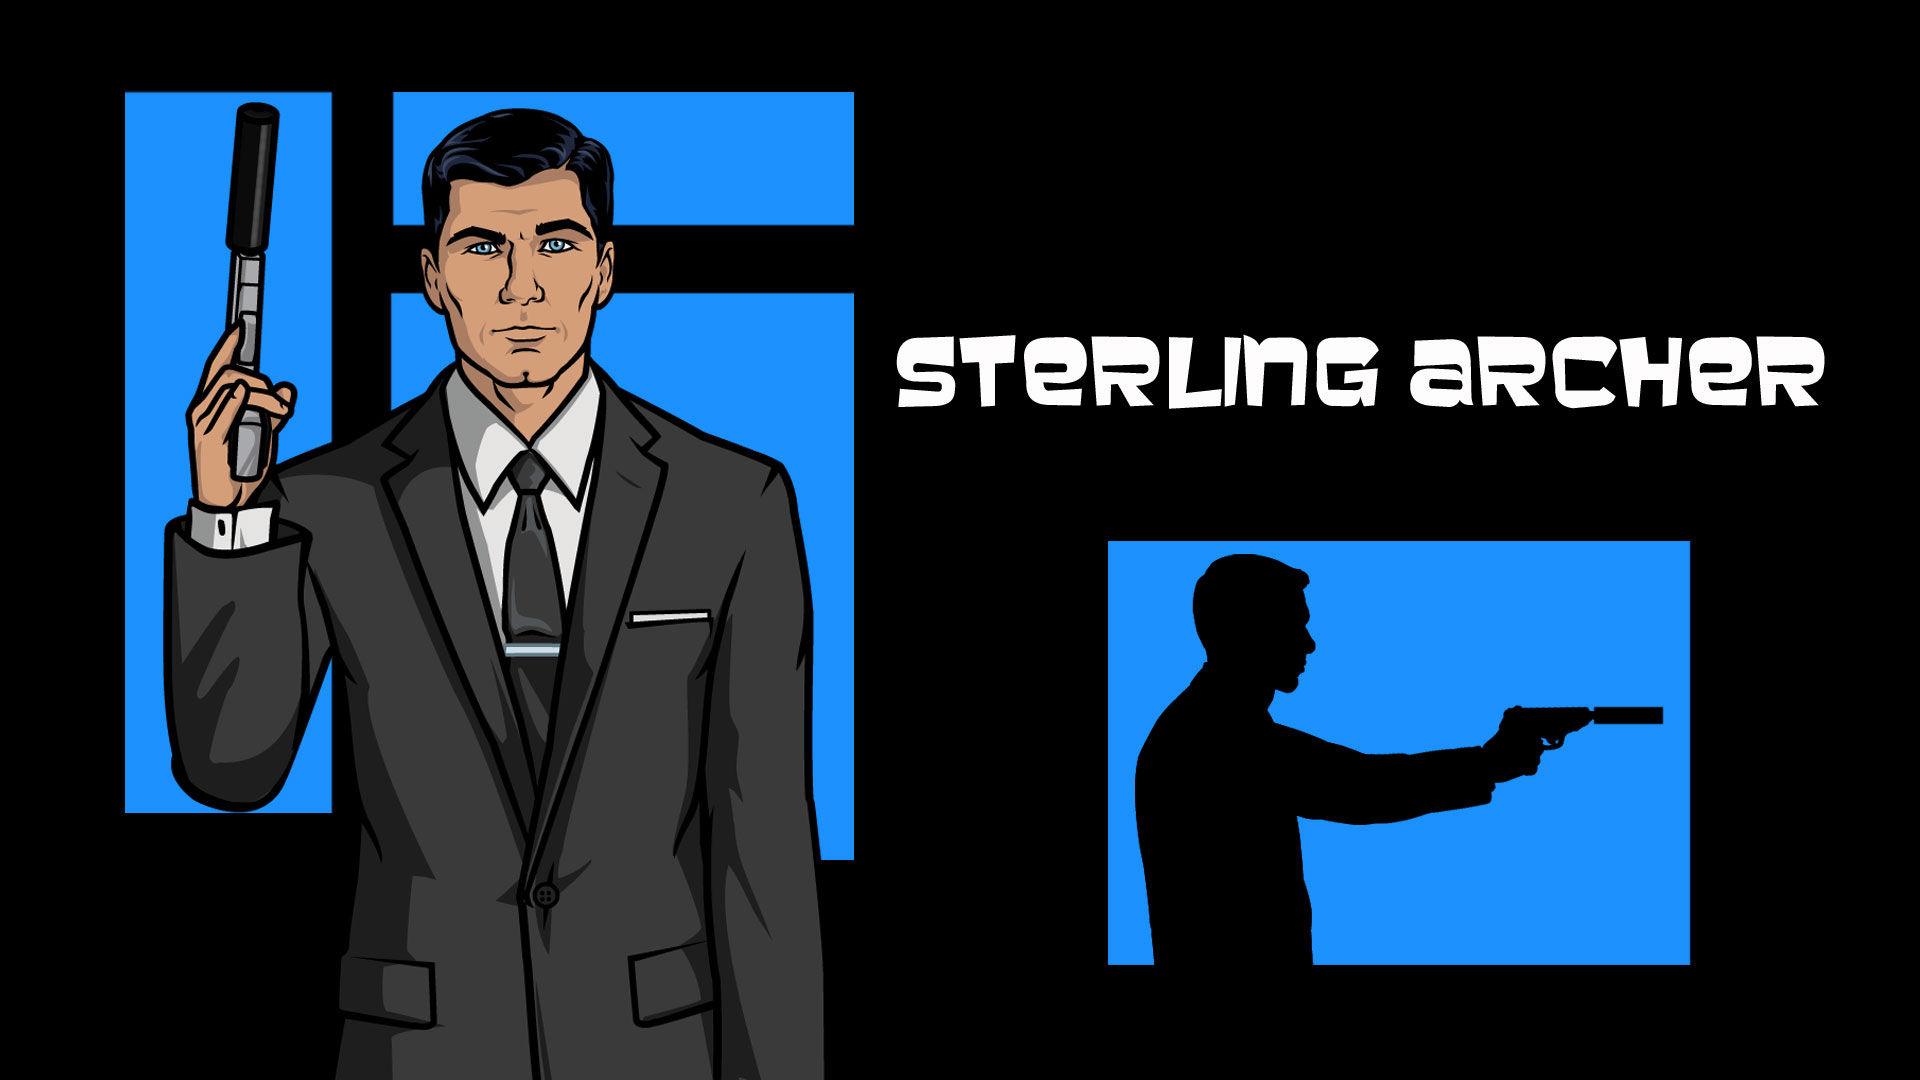 The Sterling Archer Wallpaper